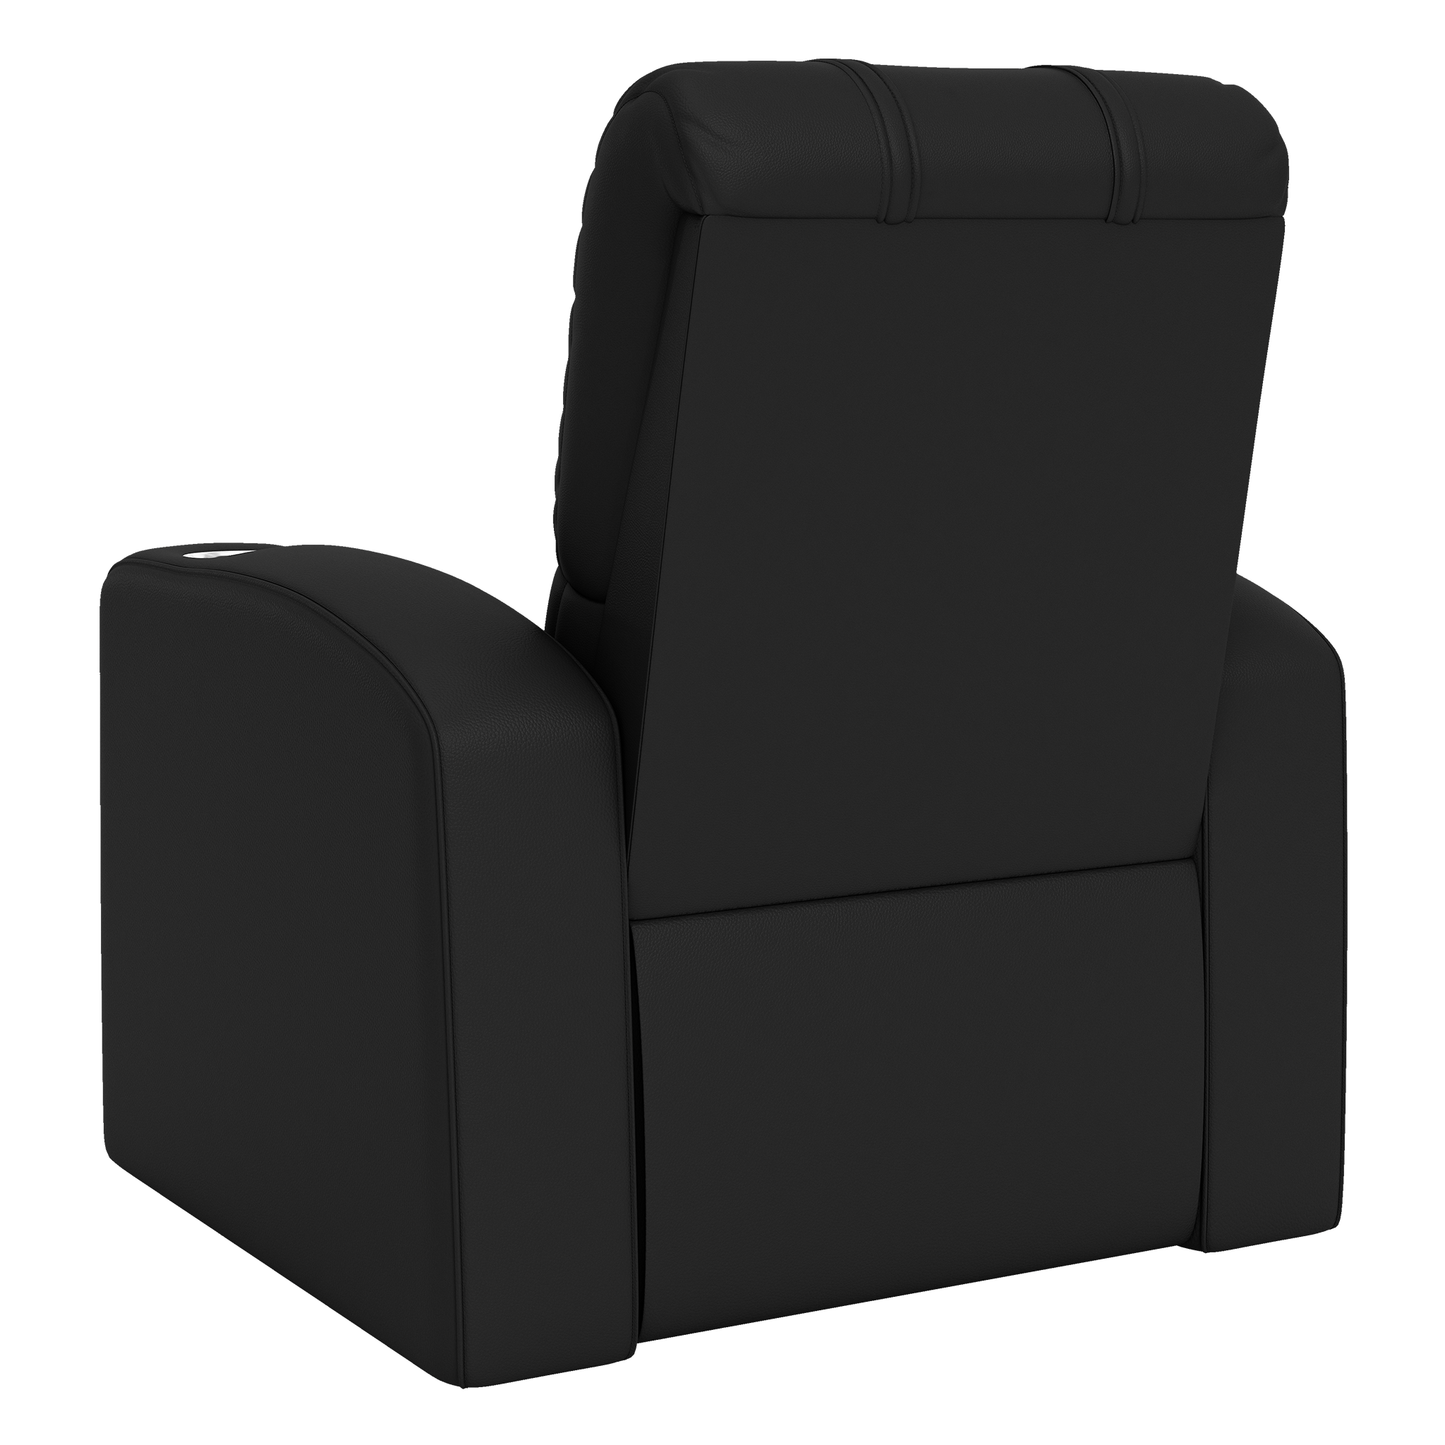 Relax Home Theater Recliner with Toronto Blue Jays Secondary